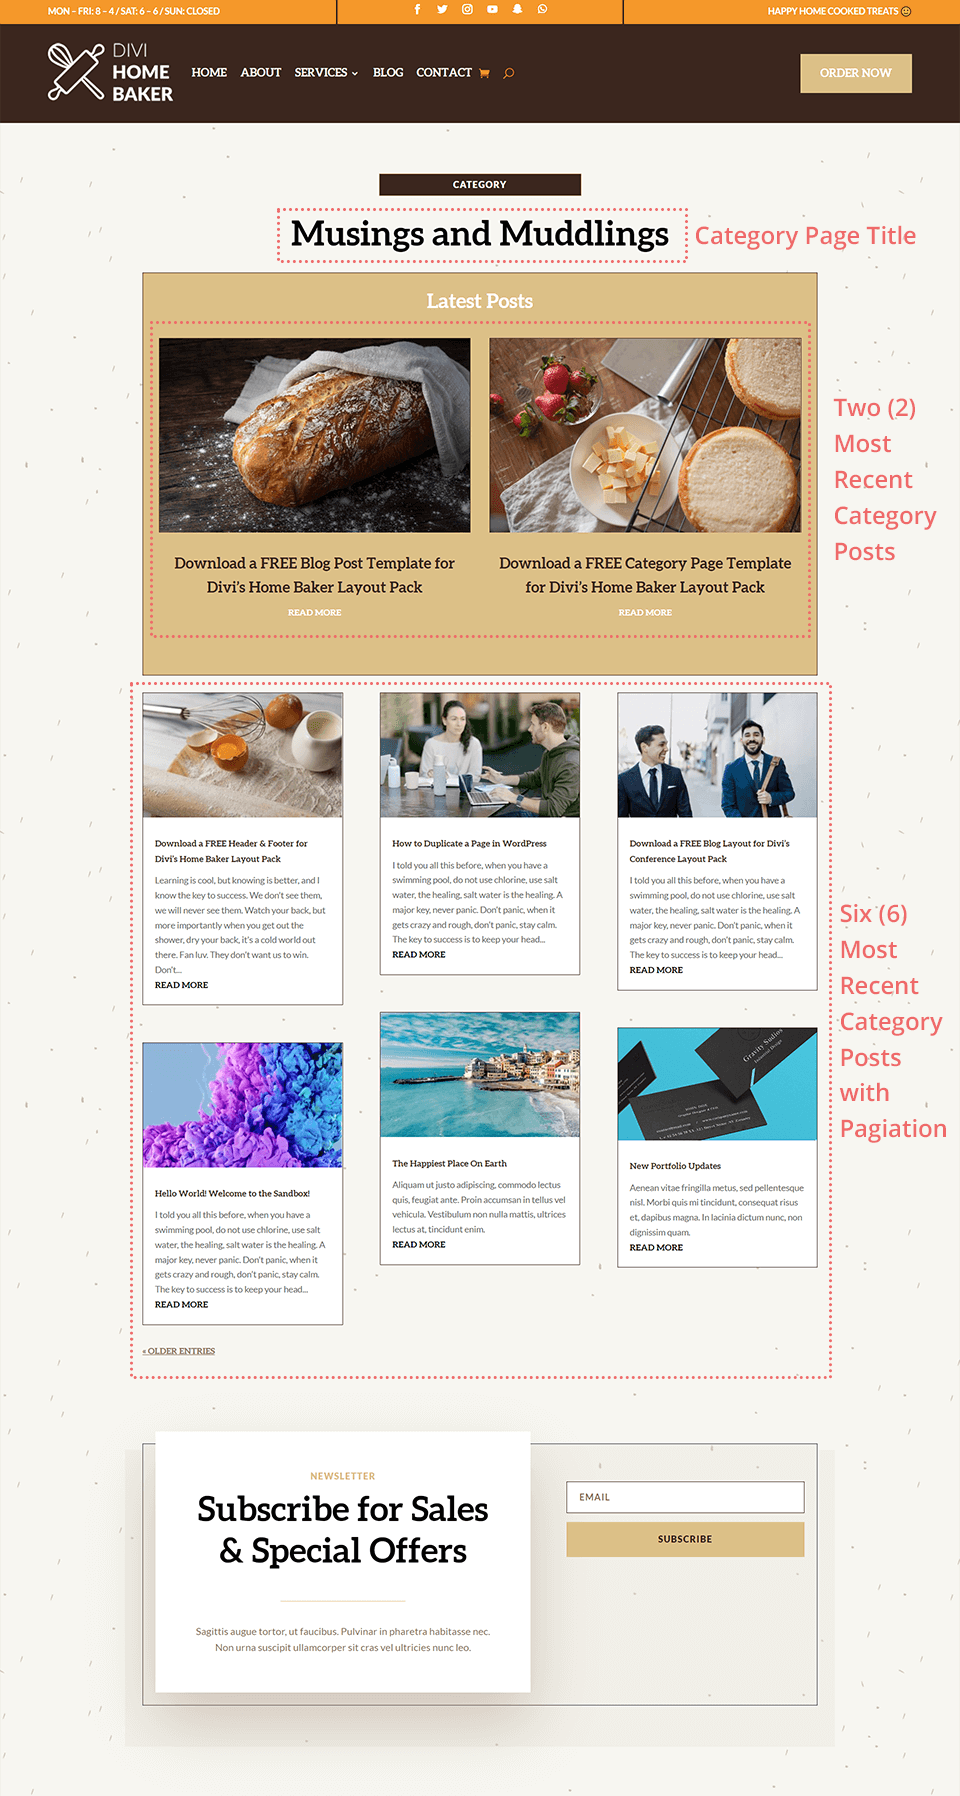 Illustration of Prepopulated Modules in the Category Page Template for Divi's Home Baker Layout Pack